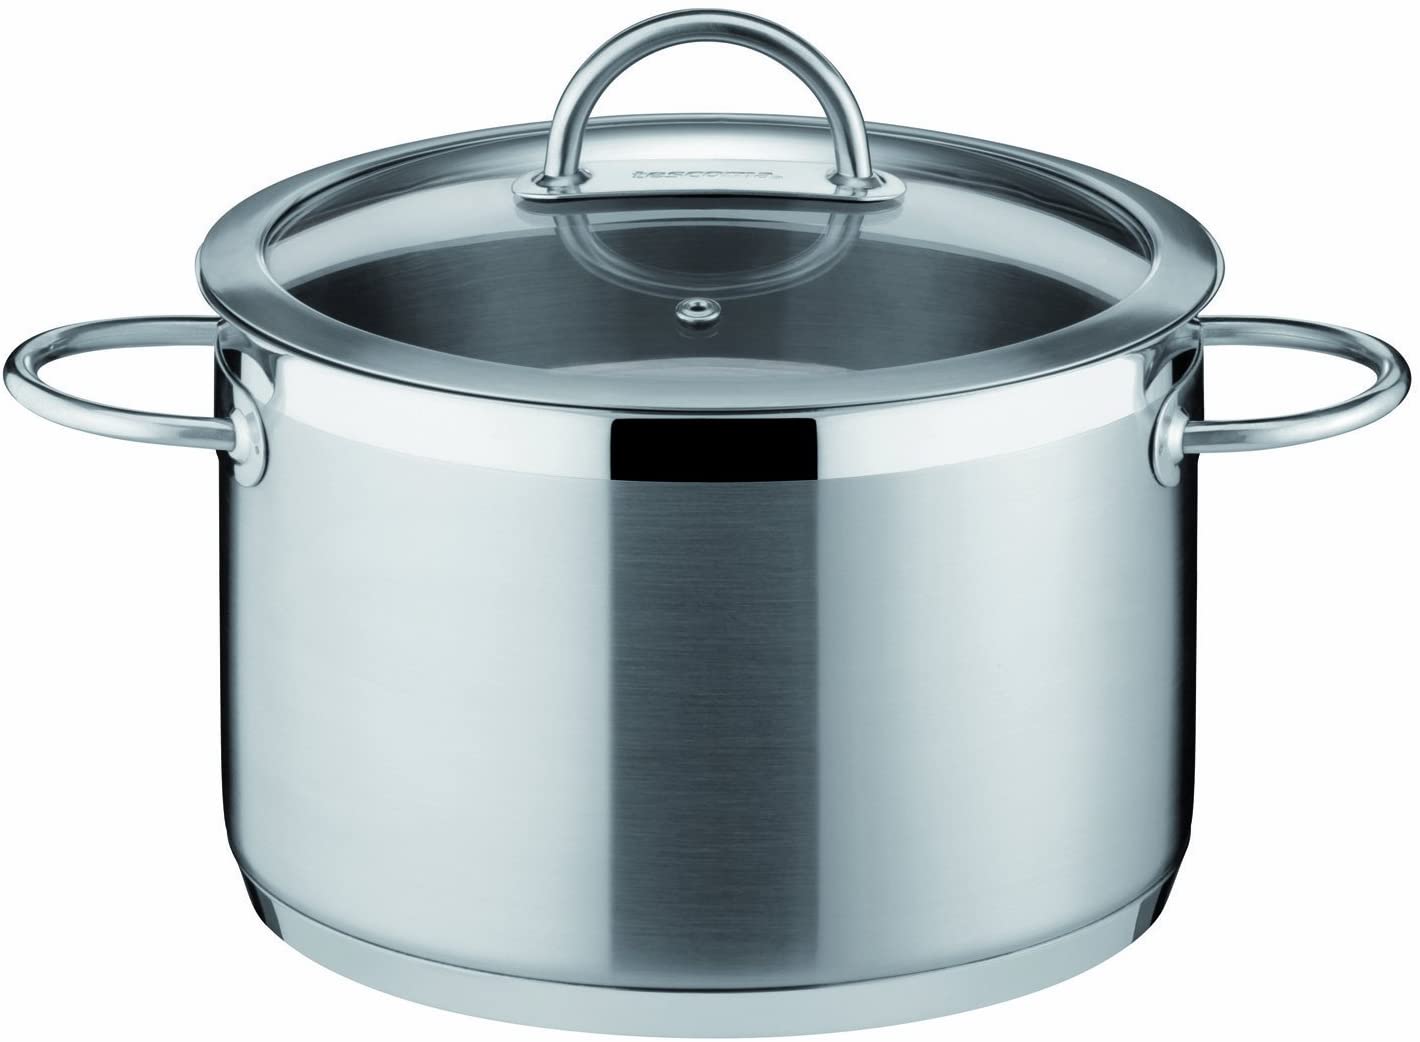 Tescoma Vision 24 cm/ 7 Litre Deep Pot with Cover